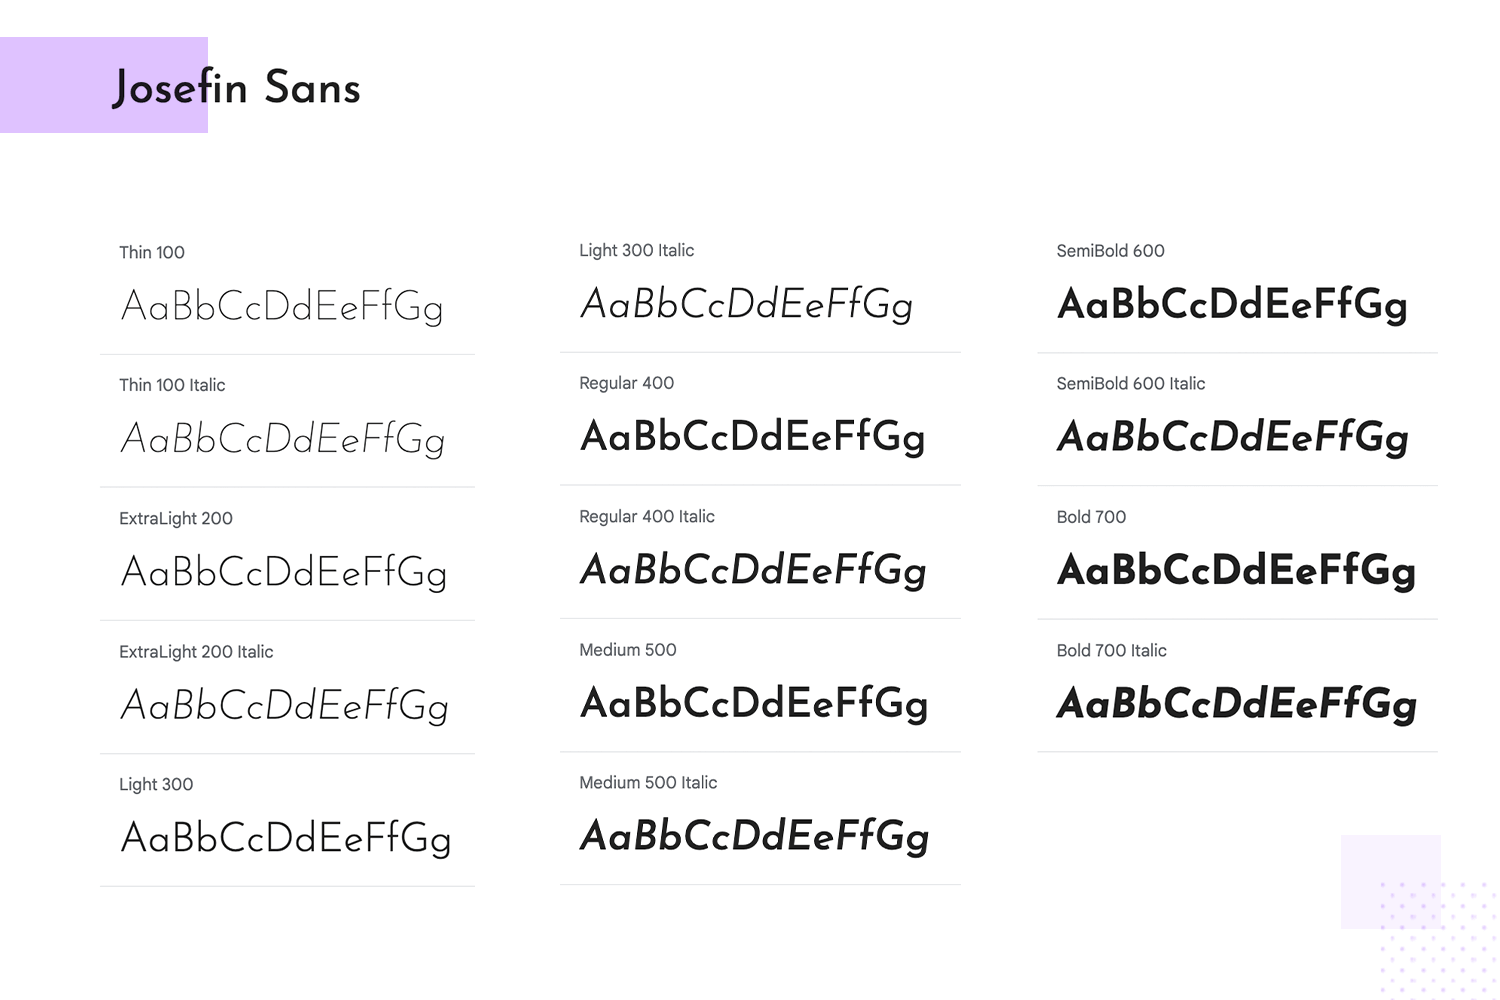 Josefin Sans font showcase with weights from Thin 100 to Bold 700, including italics